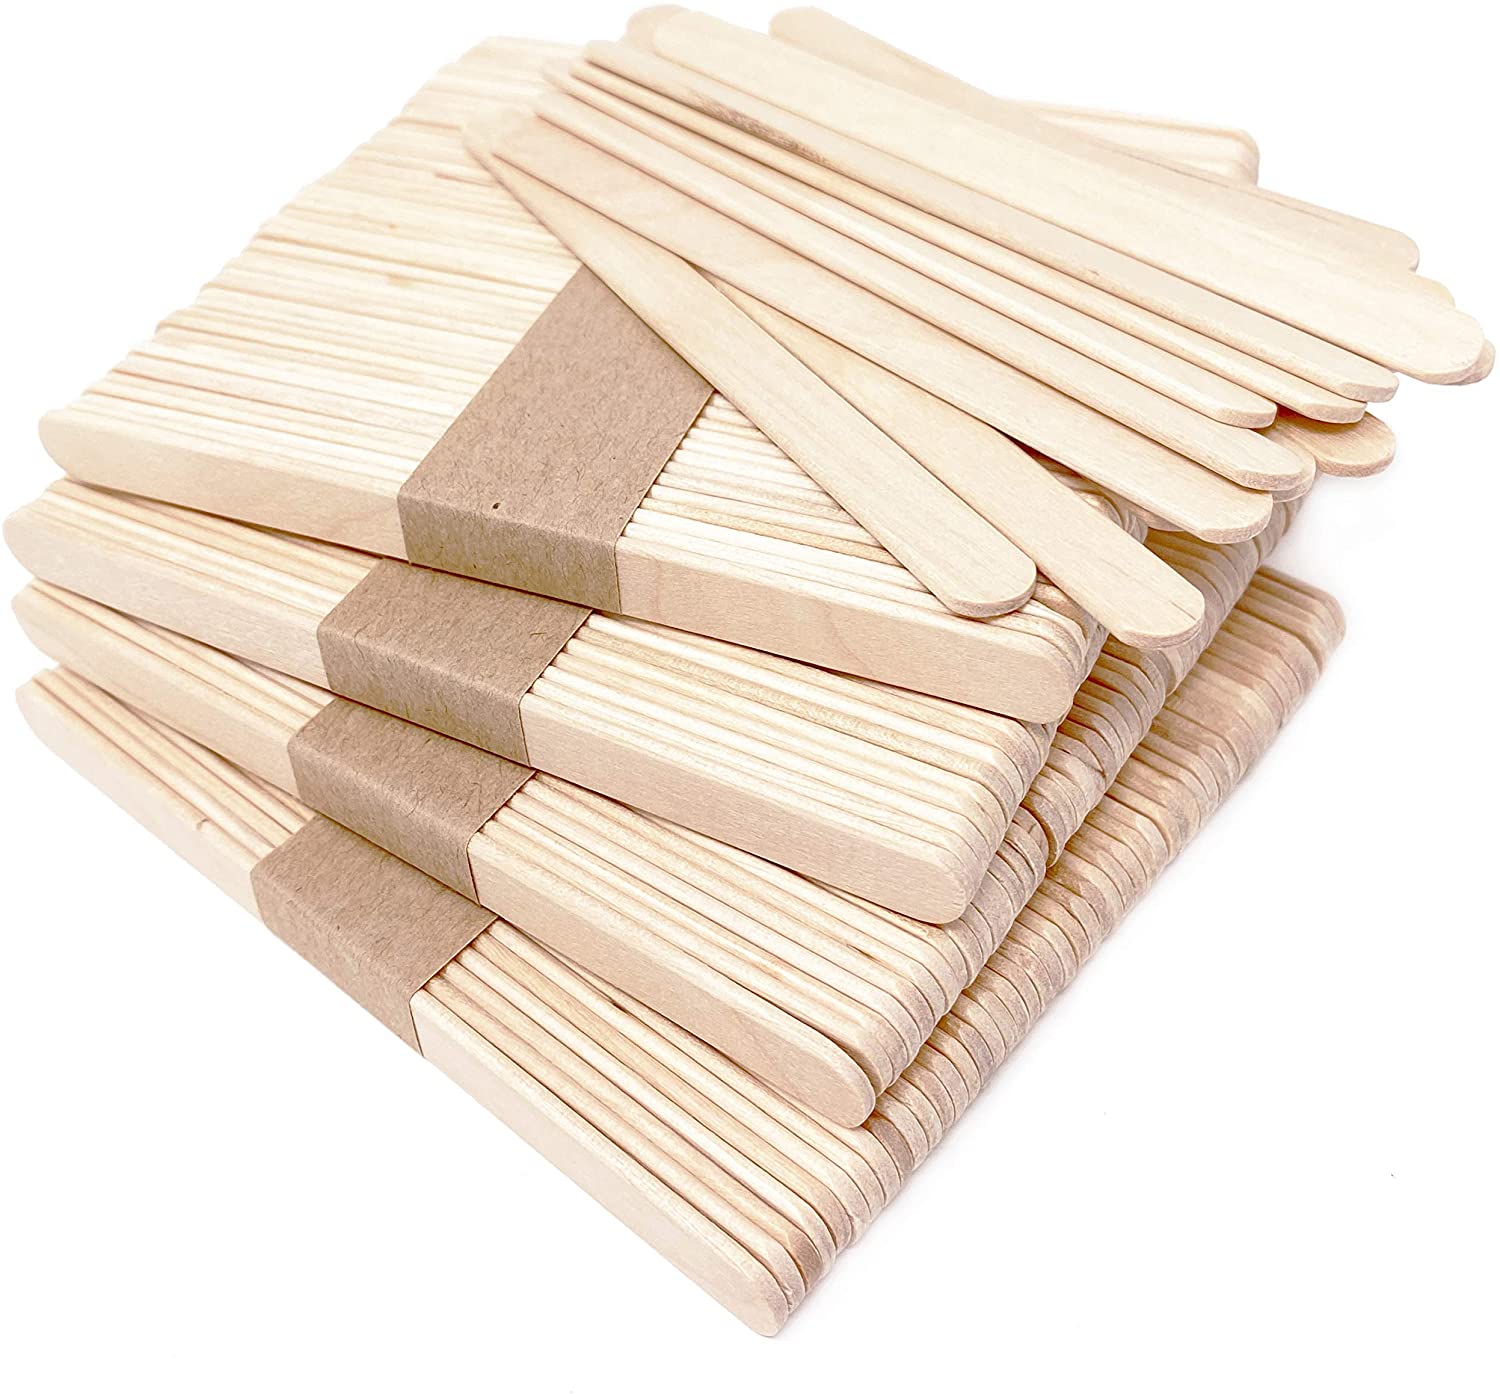 200 Natural Wood Craft, Popsicle Sticks for Crafts 4.5 Inch